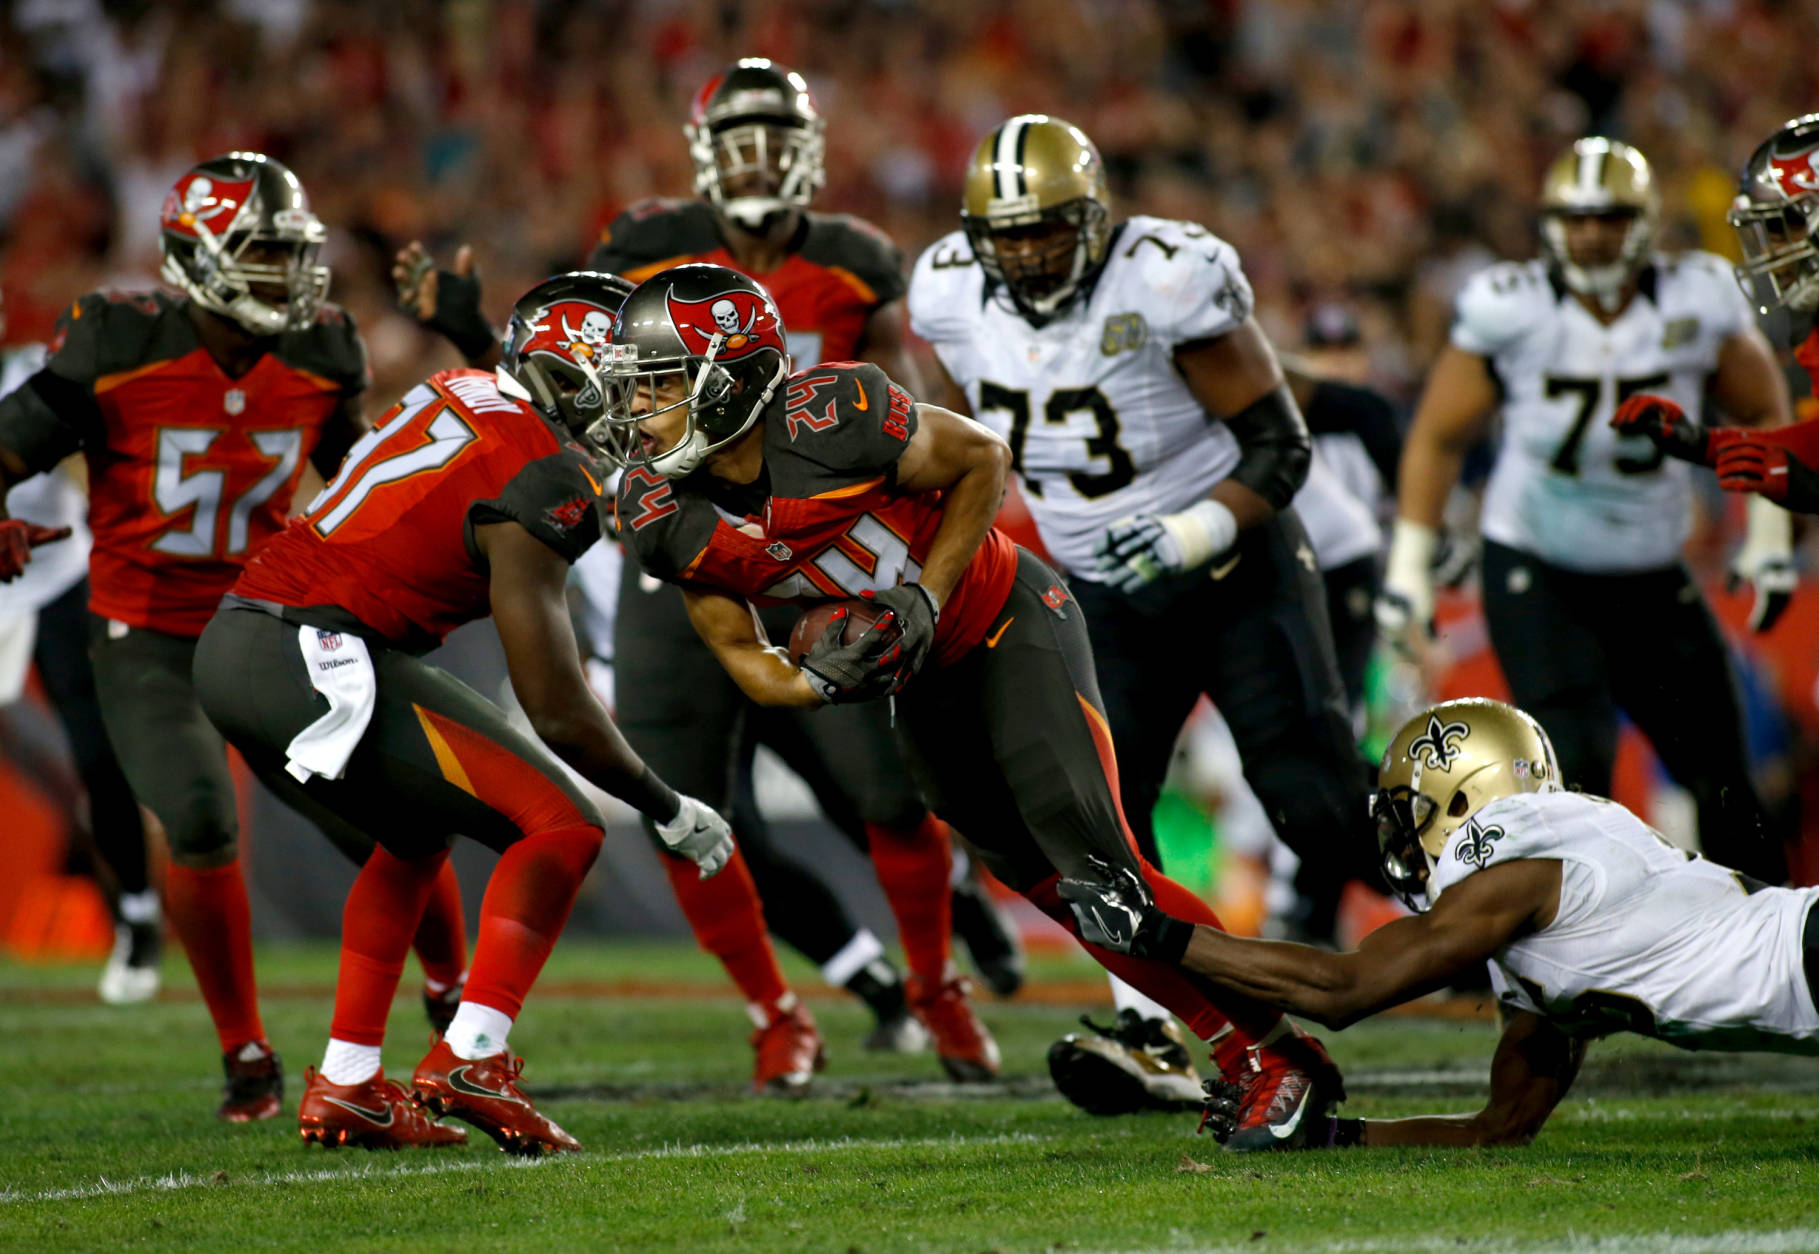 TAMPA, FL - DECEMBER 11:  Cornerback Brent Grimes #24 of the Tampa Bay Buccaneers is stopped by wide receiver Brandon Coleman #16 of the New Orleans Saints after intercepting a pass by quarterback Drew Brees during the fourth quarter of an NFL game on December 11, 2016 at Raymond James Stadium in Tampa, Florida. (Photo by Brian Blanco/Getty Images)